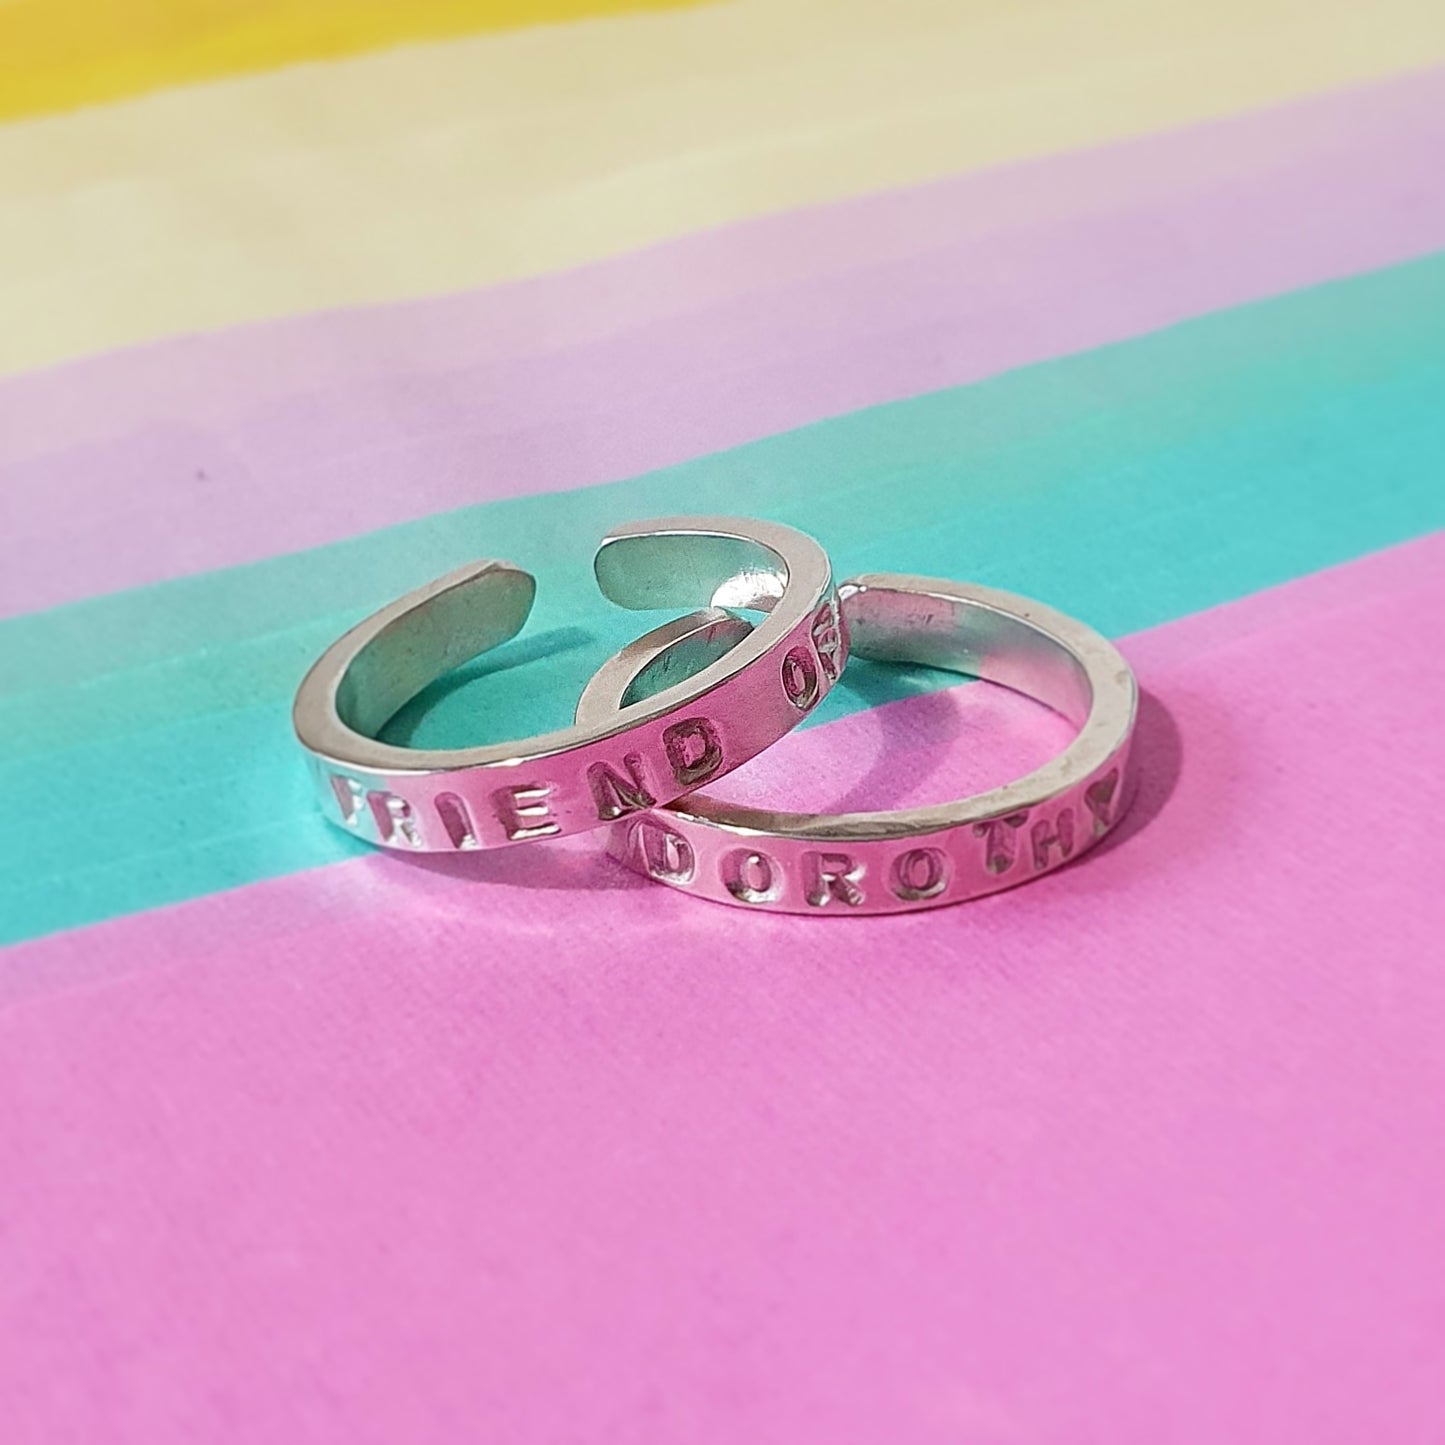 2 Silver rings sit on a colourful background. The words on the rings spell "Friend of Dorothy". The rings are left open so they are adjustable for different sizes.